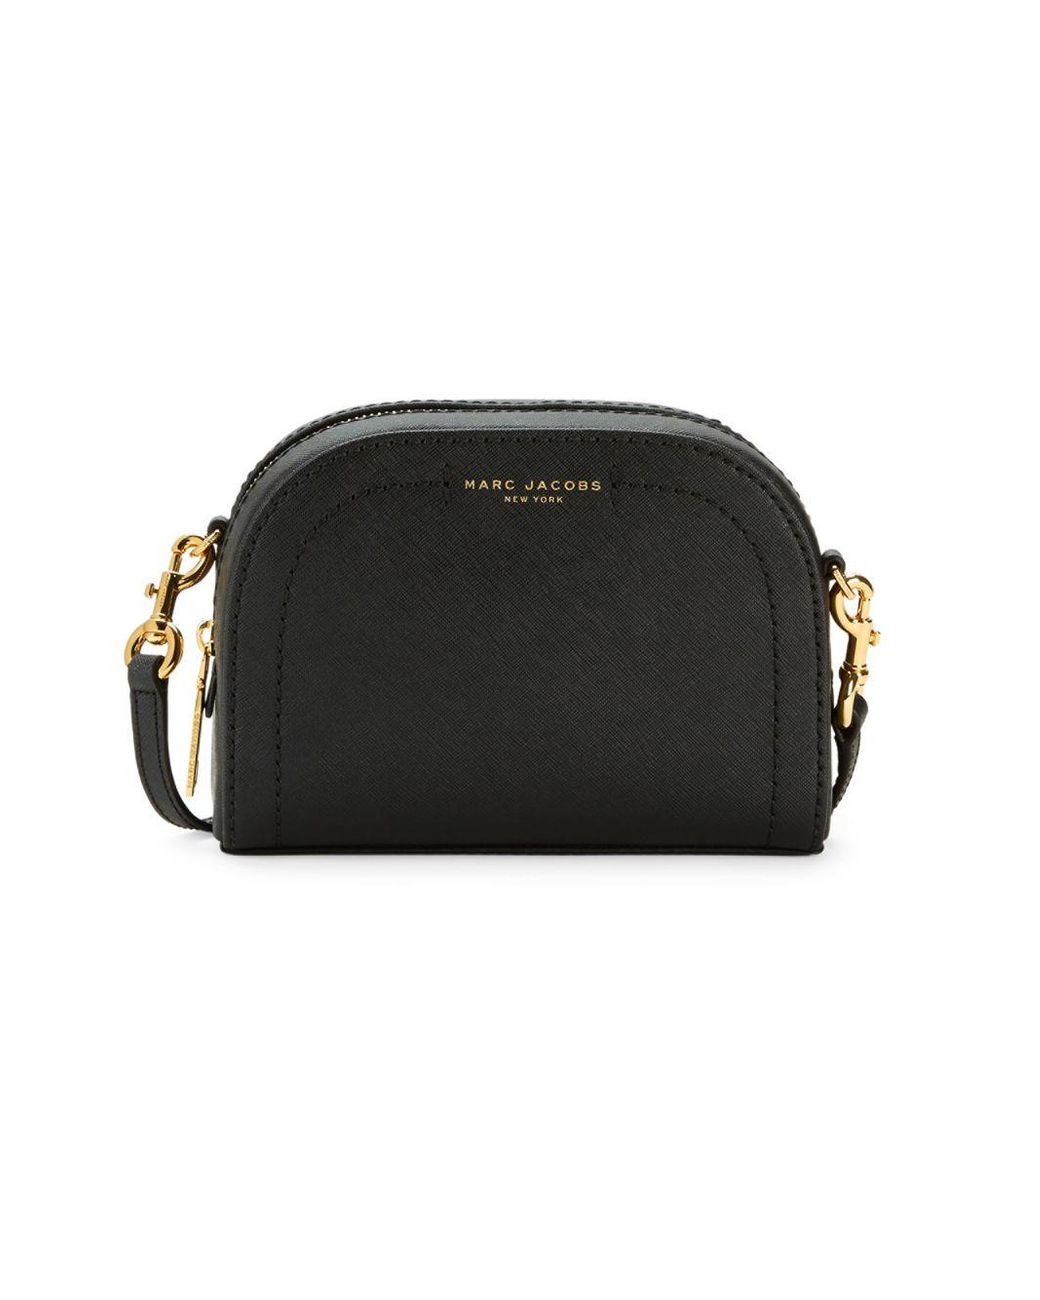 Lyst - Marc Jacobs Playback Dome Mini Bag in Black